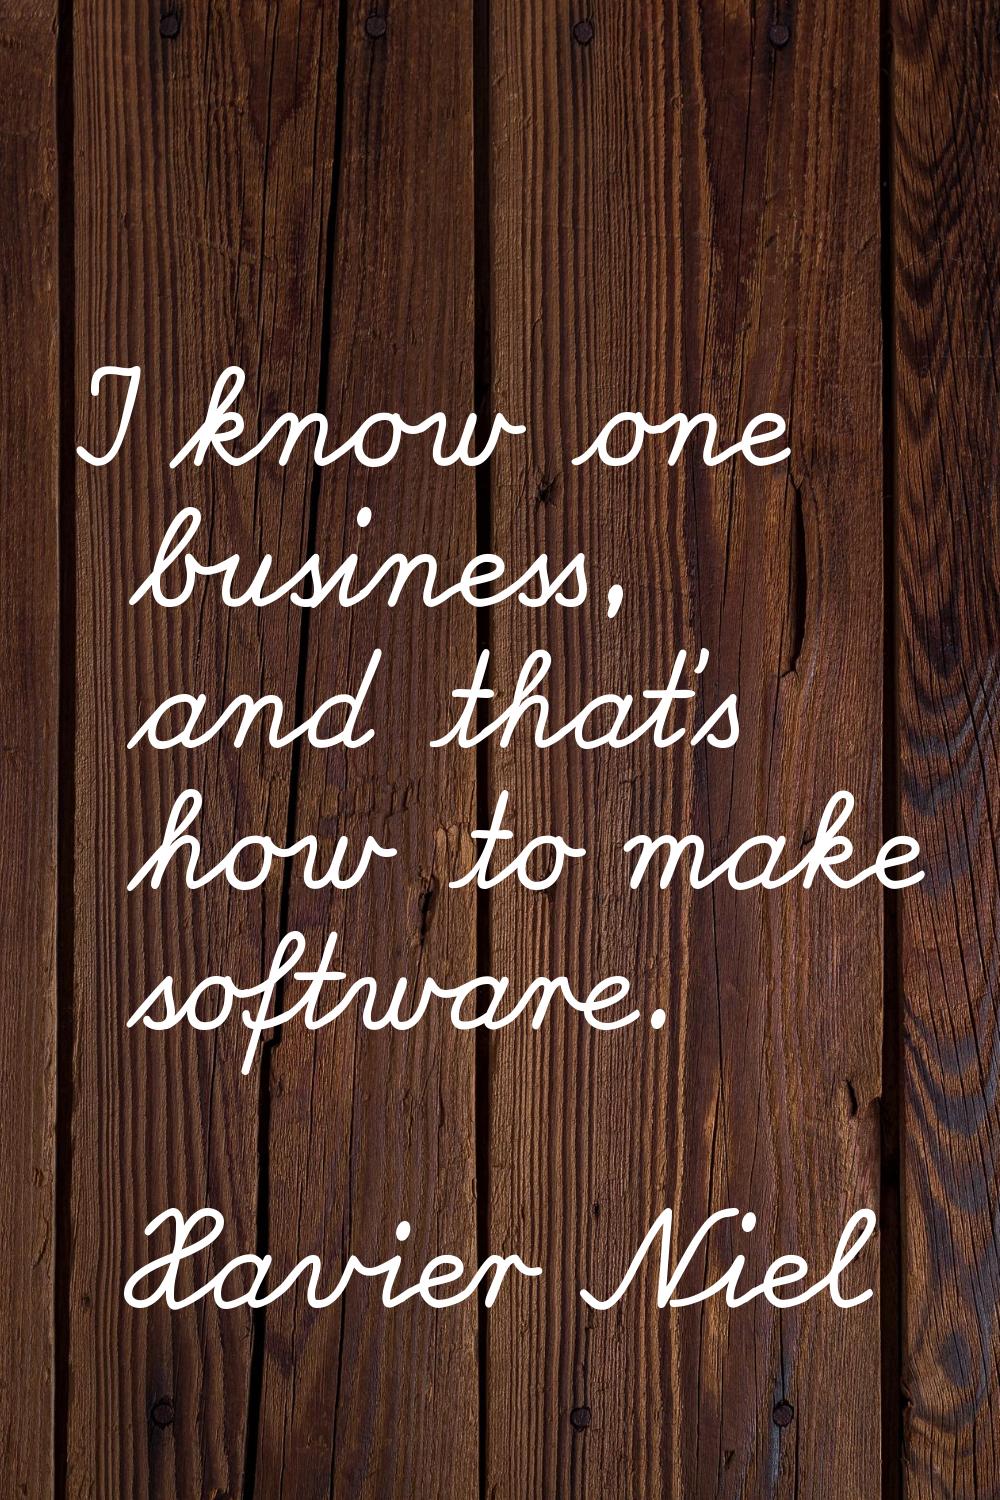 I know one business, and that's how to make software.